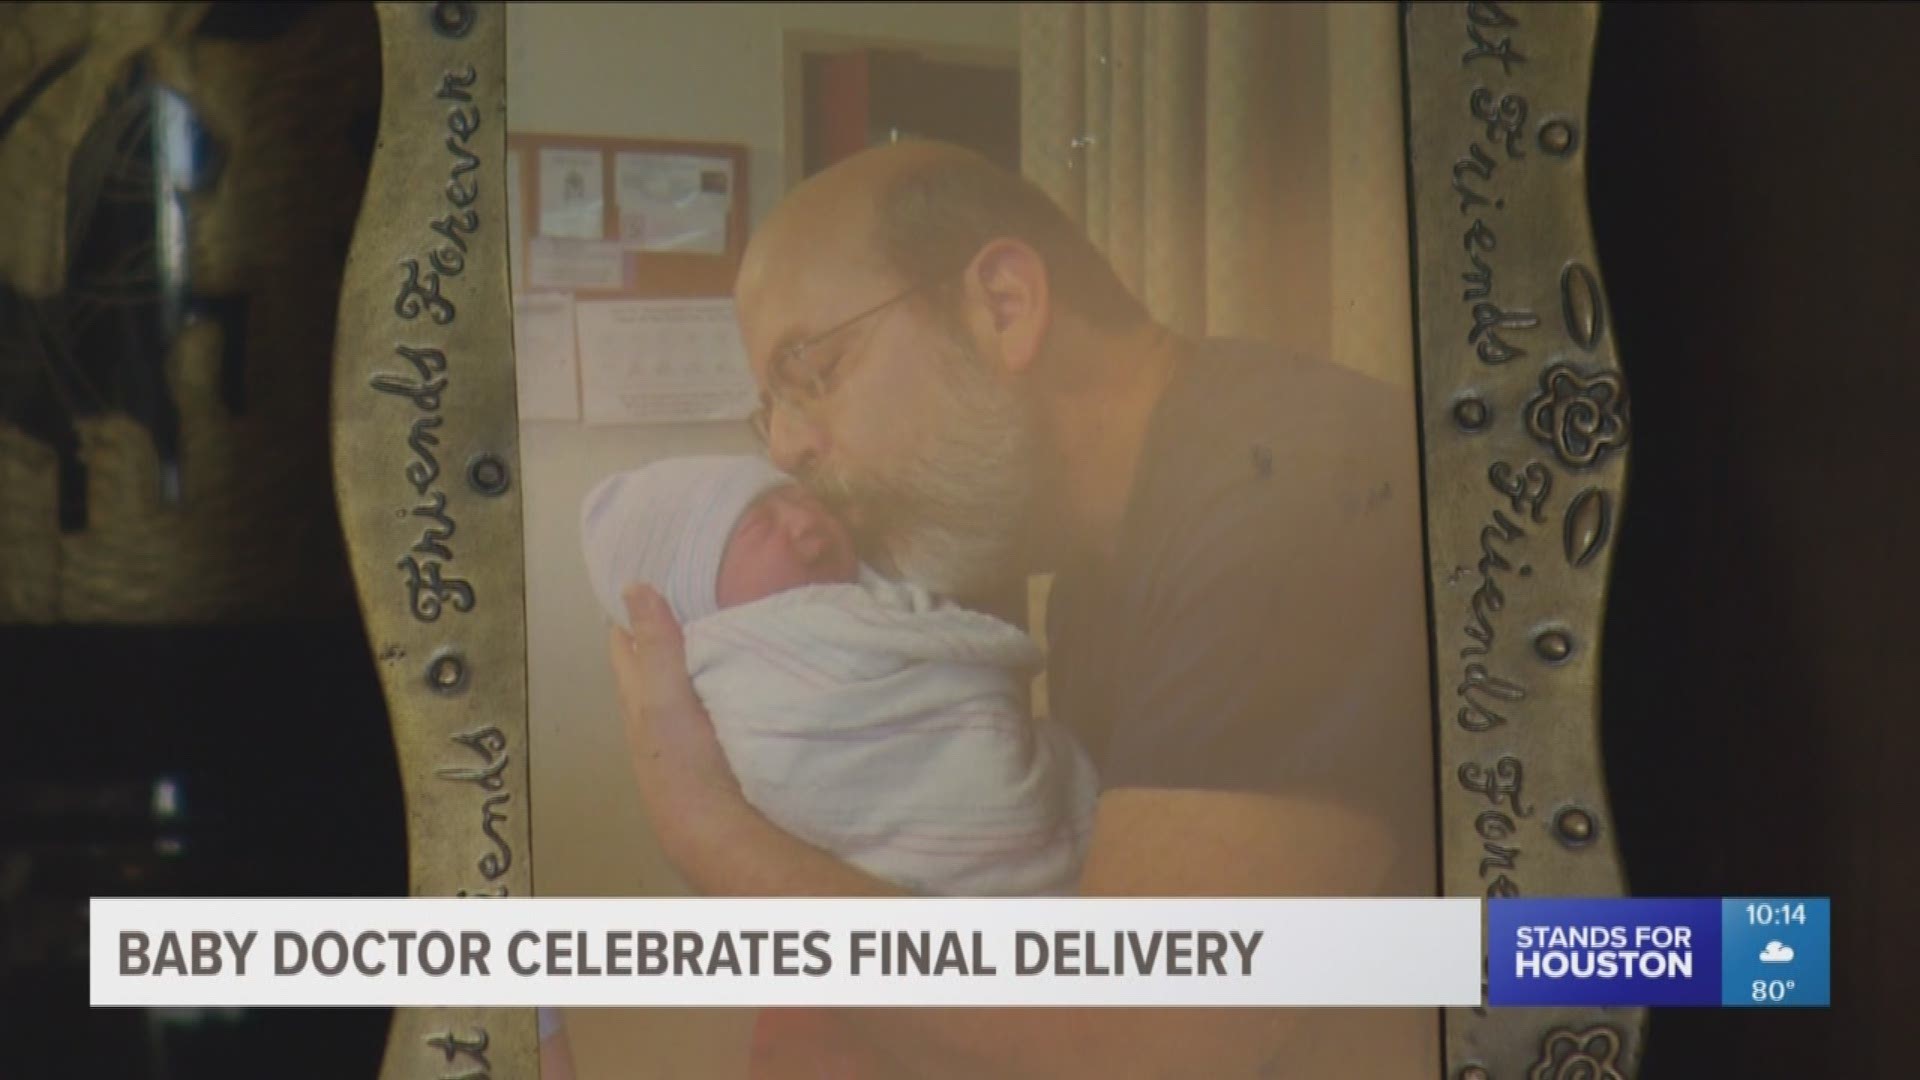 Cameras were rolling at Memorial Hermann hospital after a doctor delivered his 9,000th and final baby.